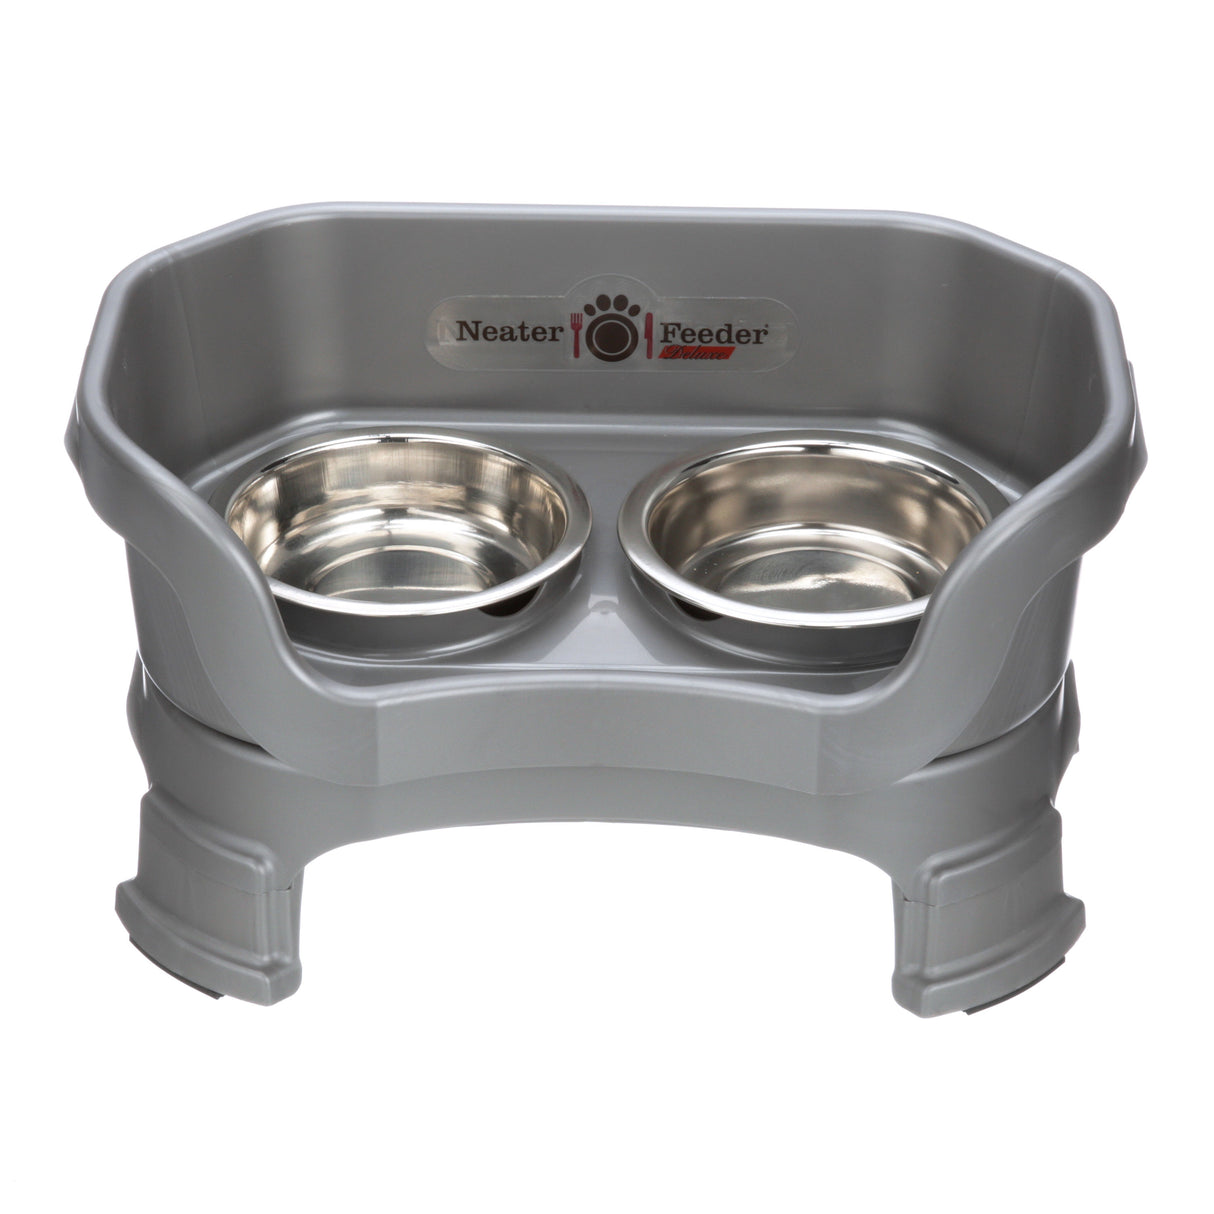 Deluxe Cat Gunmetal Grey raised Neater Feeder with leg extensions dog bowls